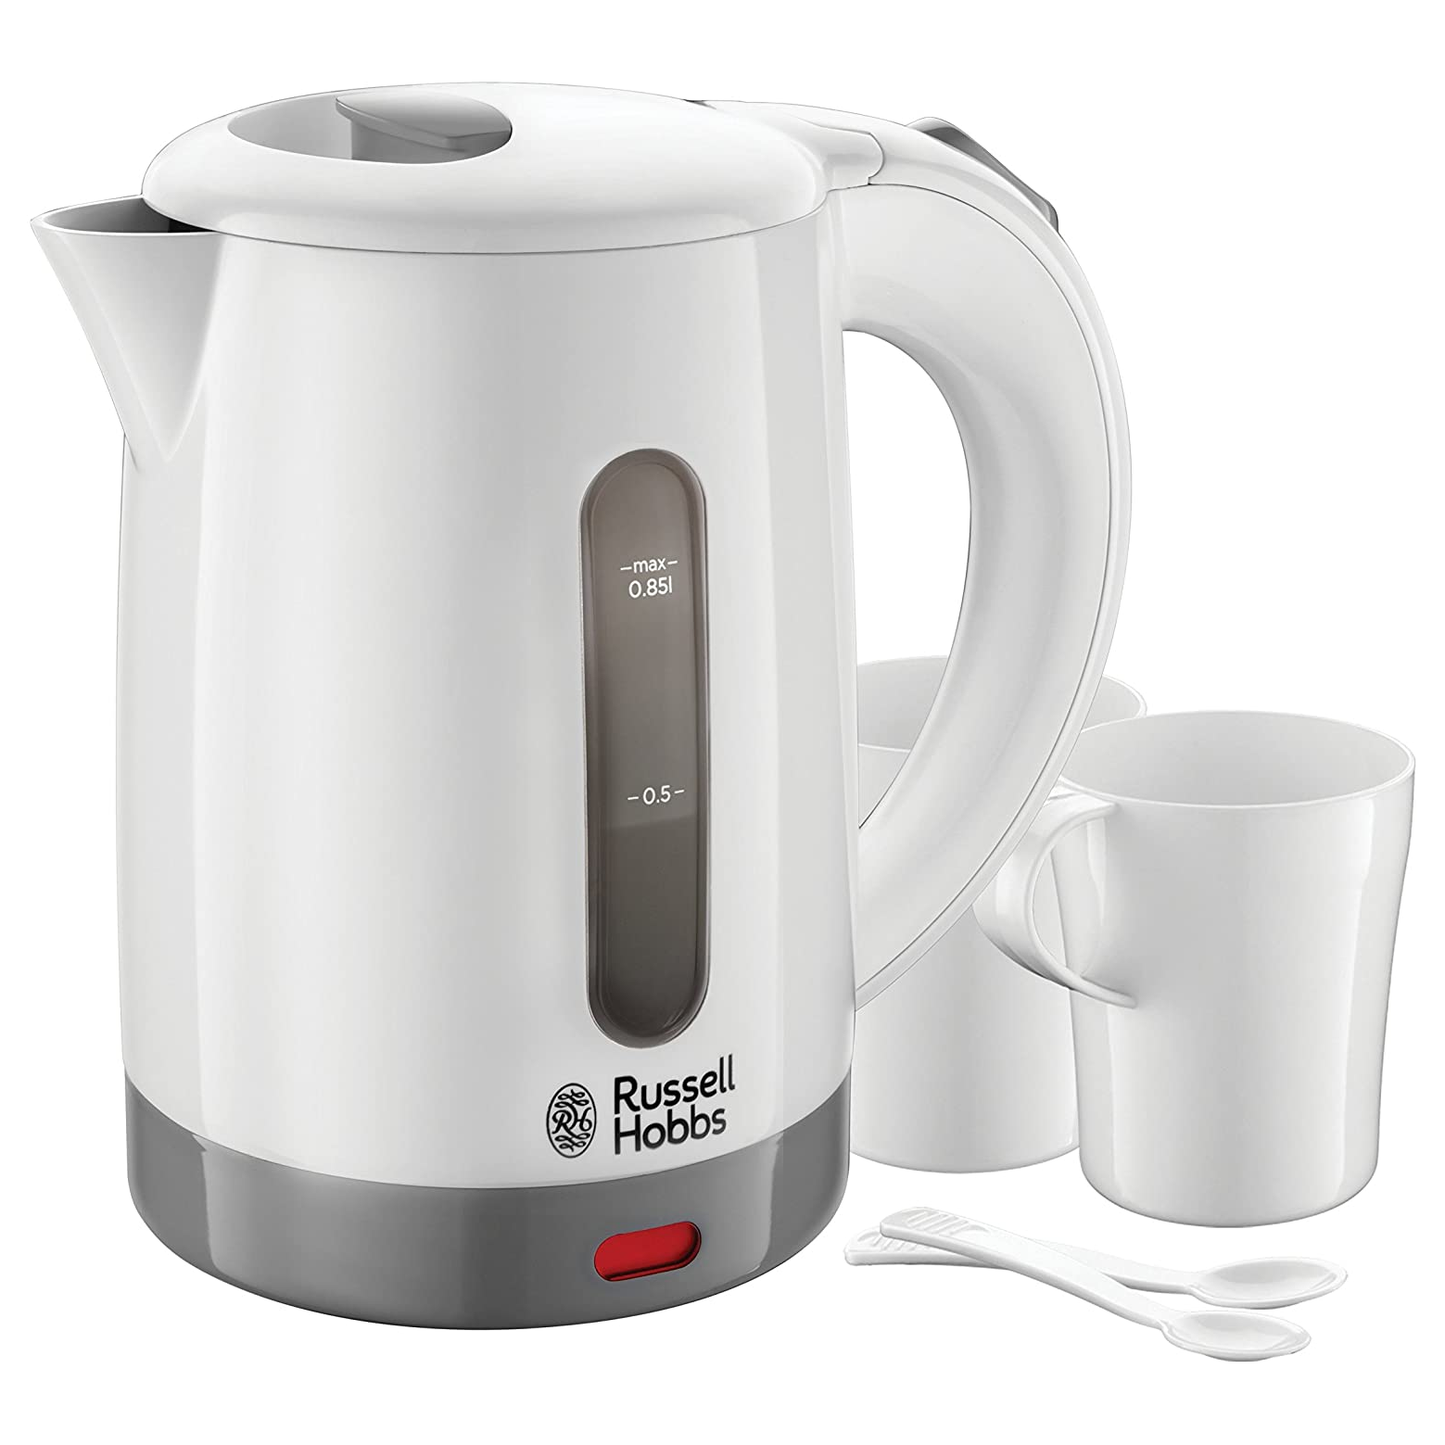 Russell Hobbs Travel Electric Kettle 0.85Ltr including 2 cups and spoons (23840)